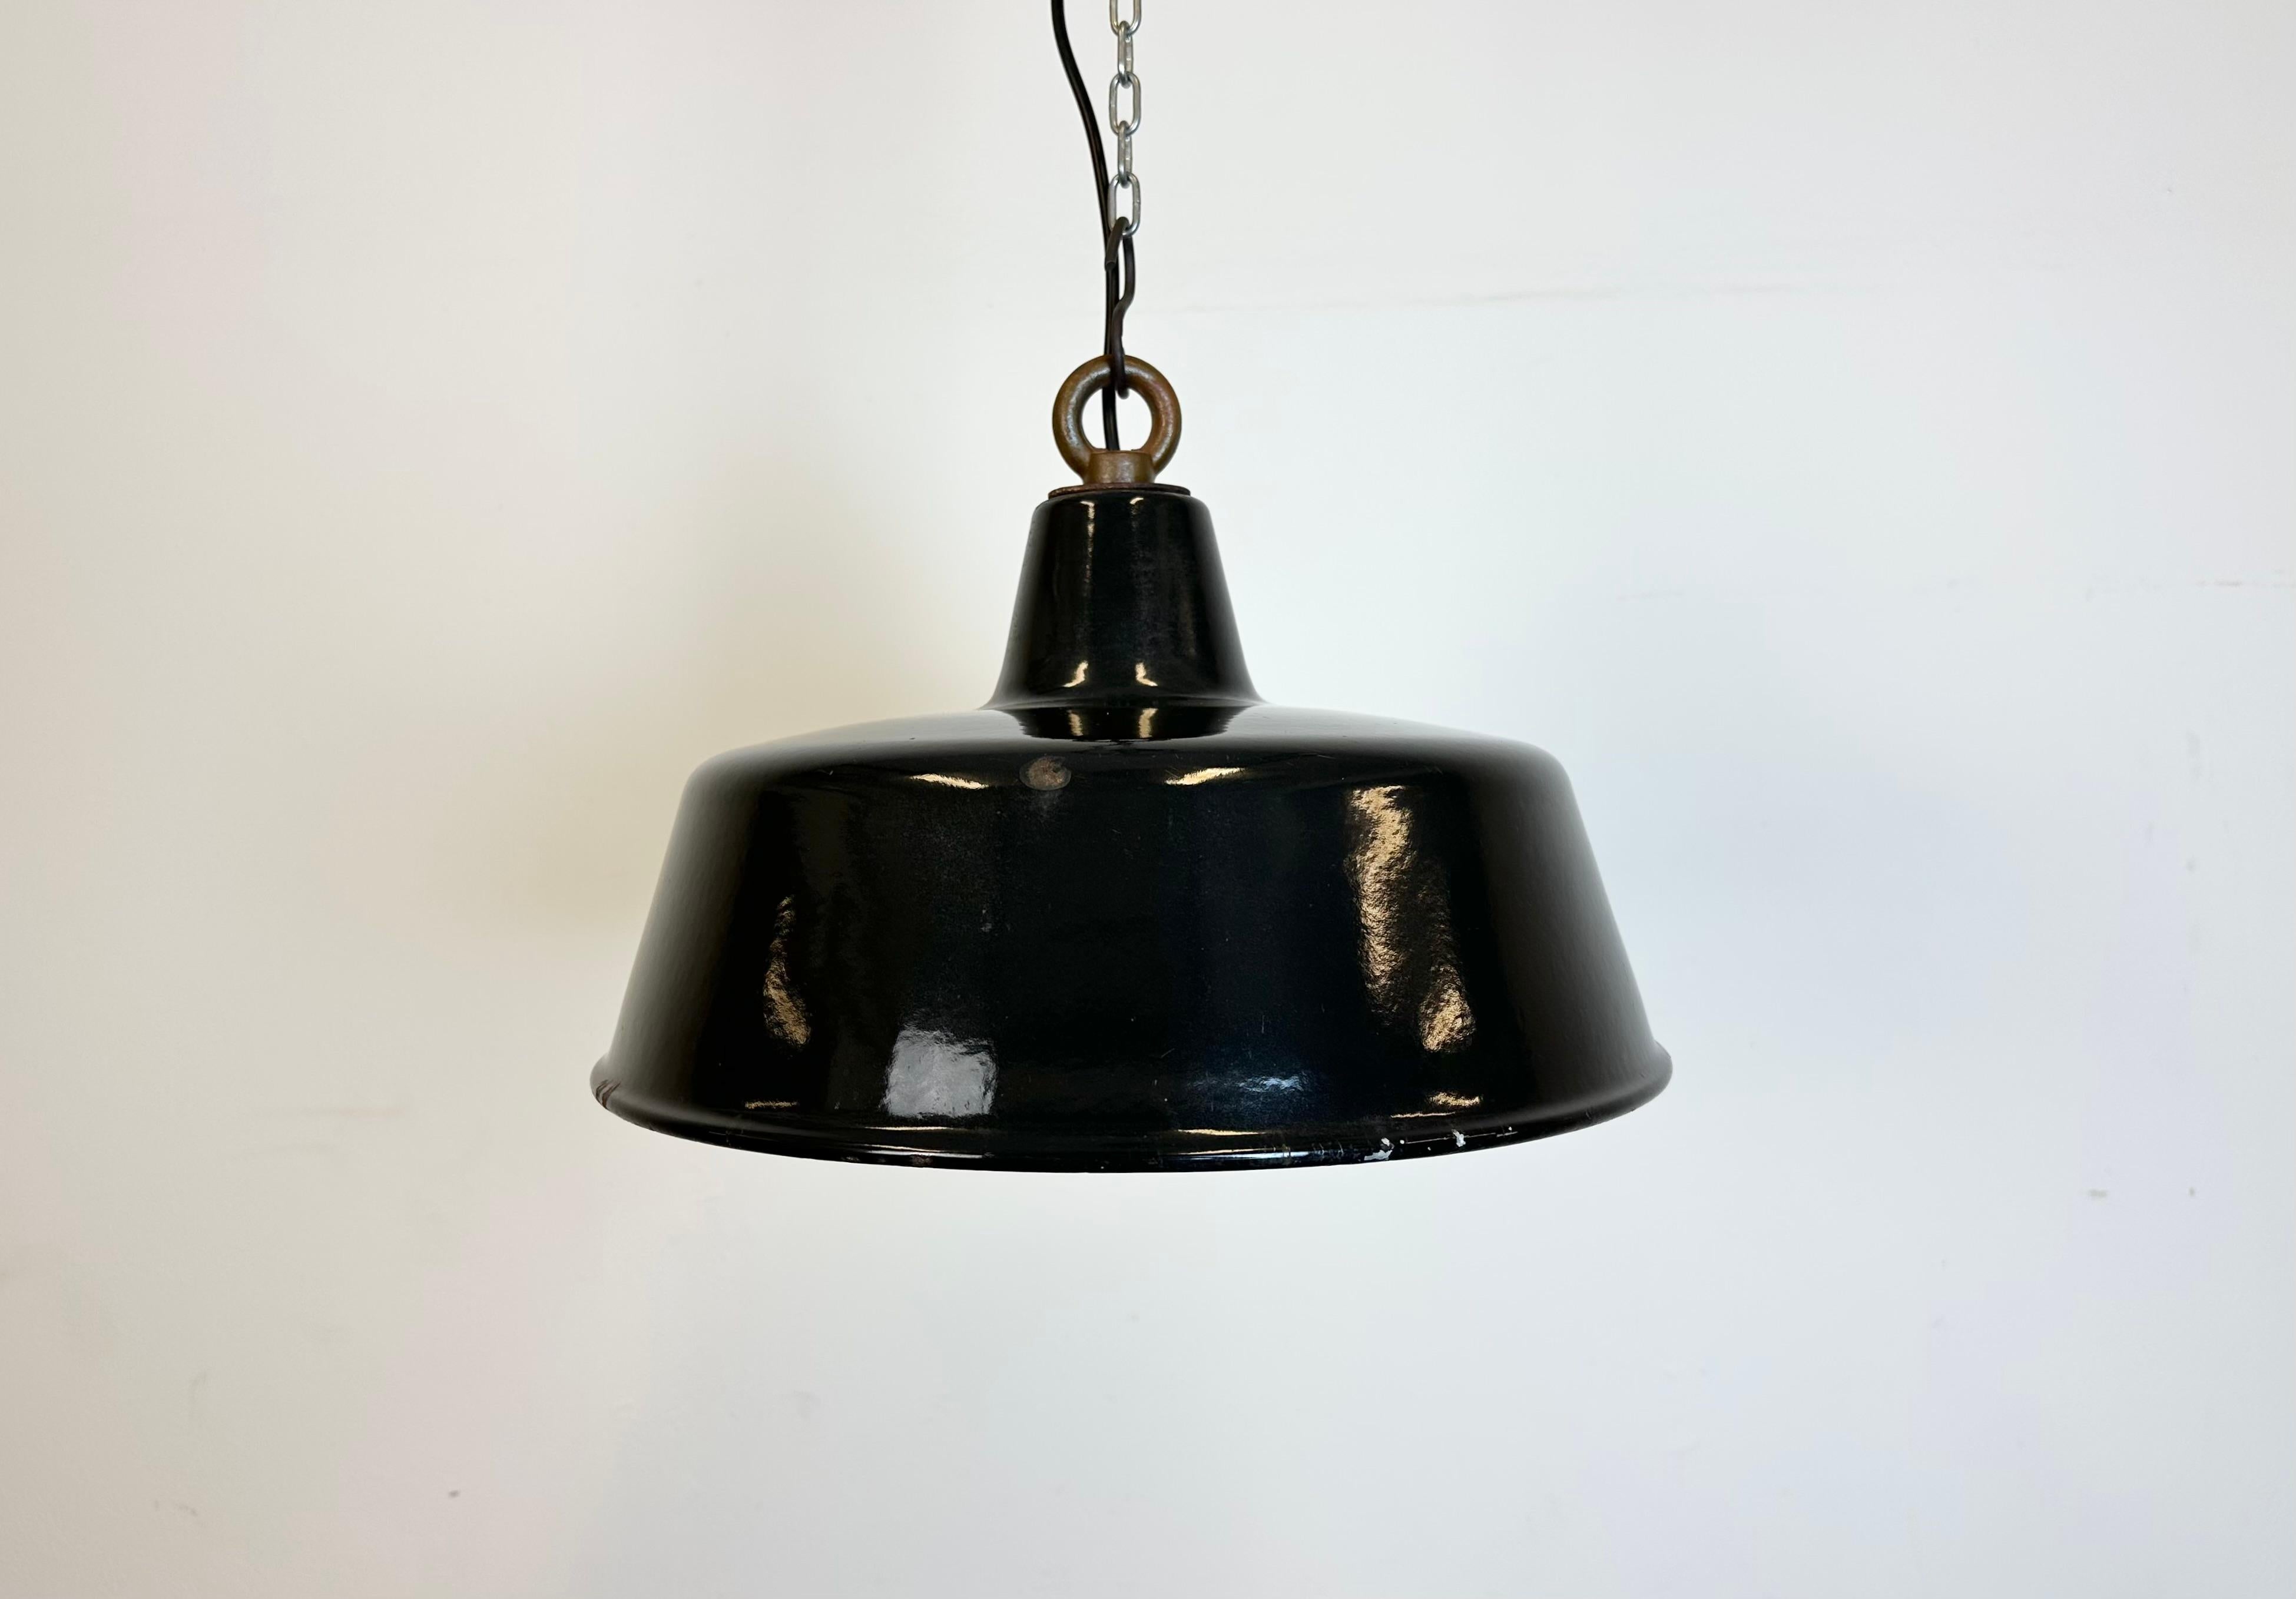 Industrial black enamel pendant lamp with white interior. Iron top. Manufactured during the 1950s. New porcelain socket rerquires standard E 27/ E26 light bulbs. New wire The diameter of the shade is 35 cm. The weight of the lamp is 1,4 kg.